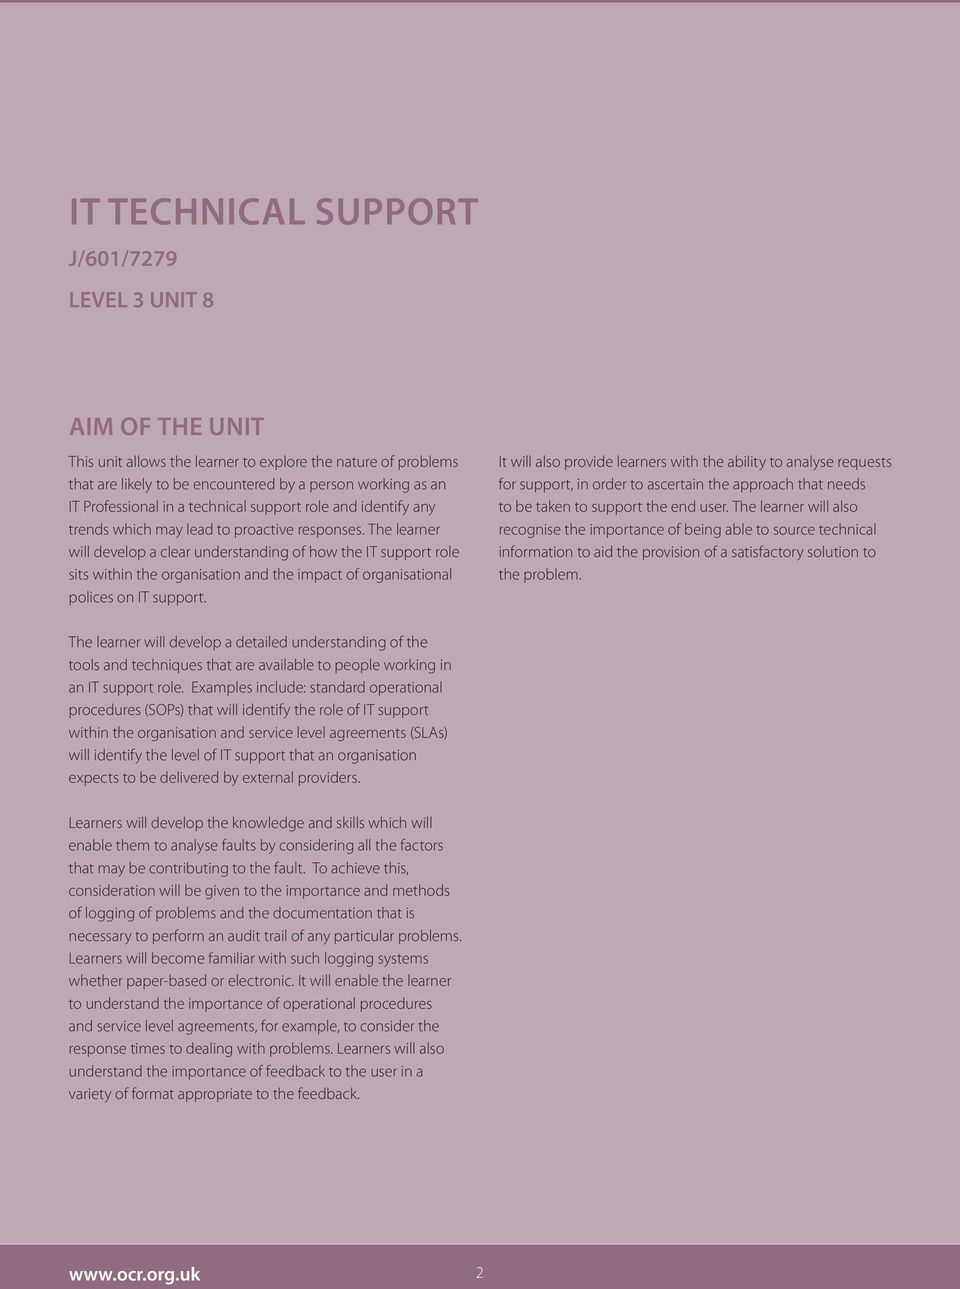 The learner will develop a clear understanding of how the IT support role sits within the organisation and the impact of organisational polices on IT support.